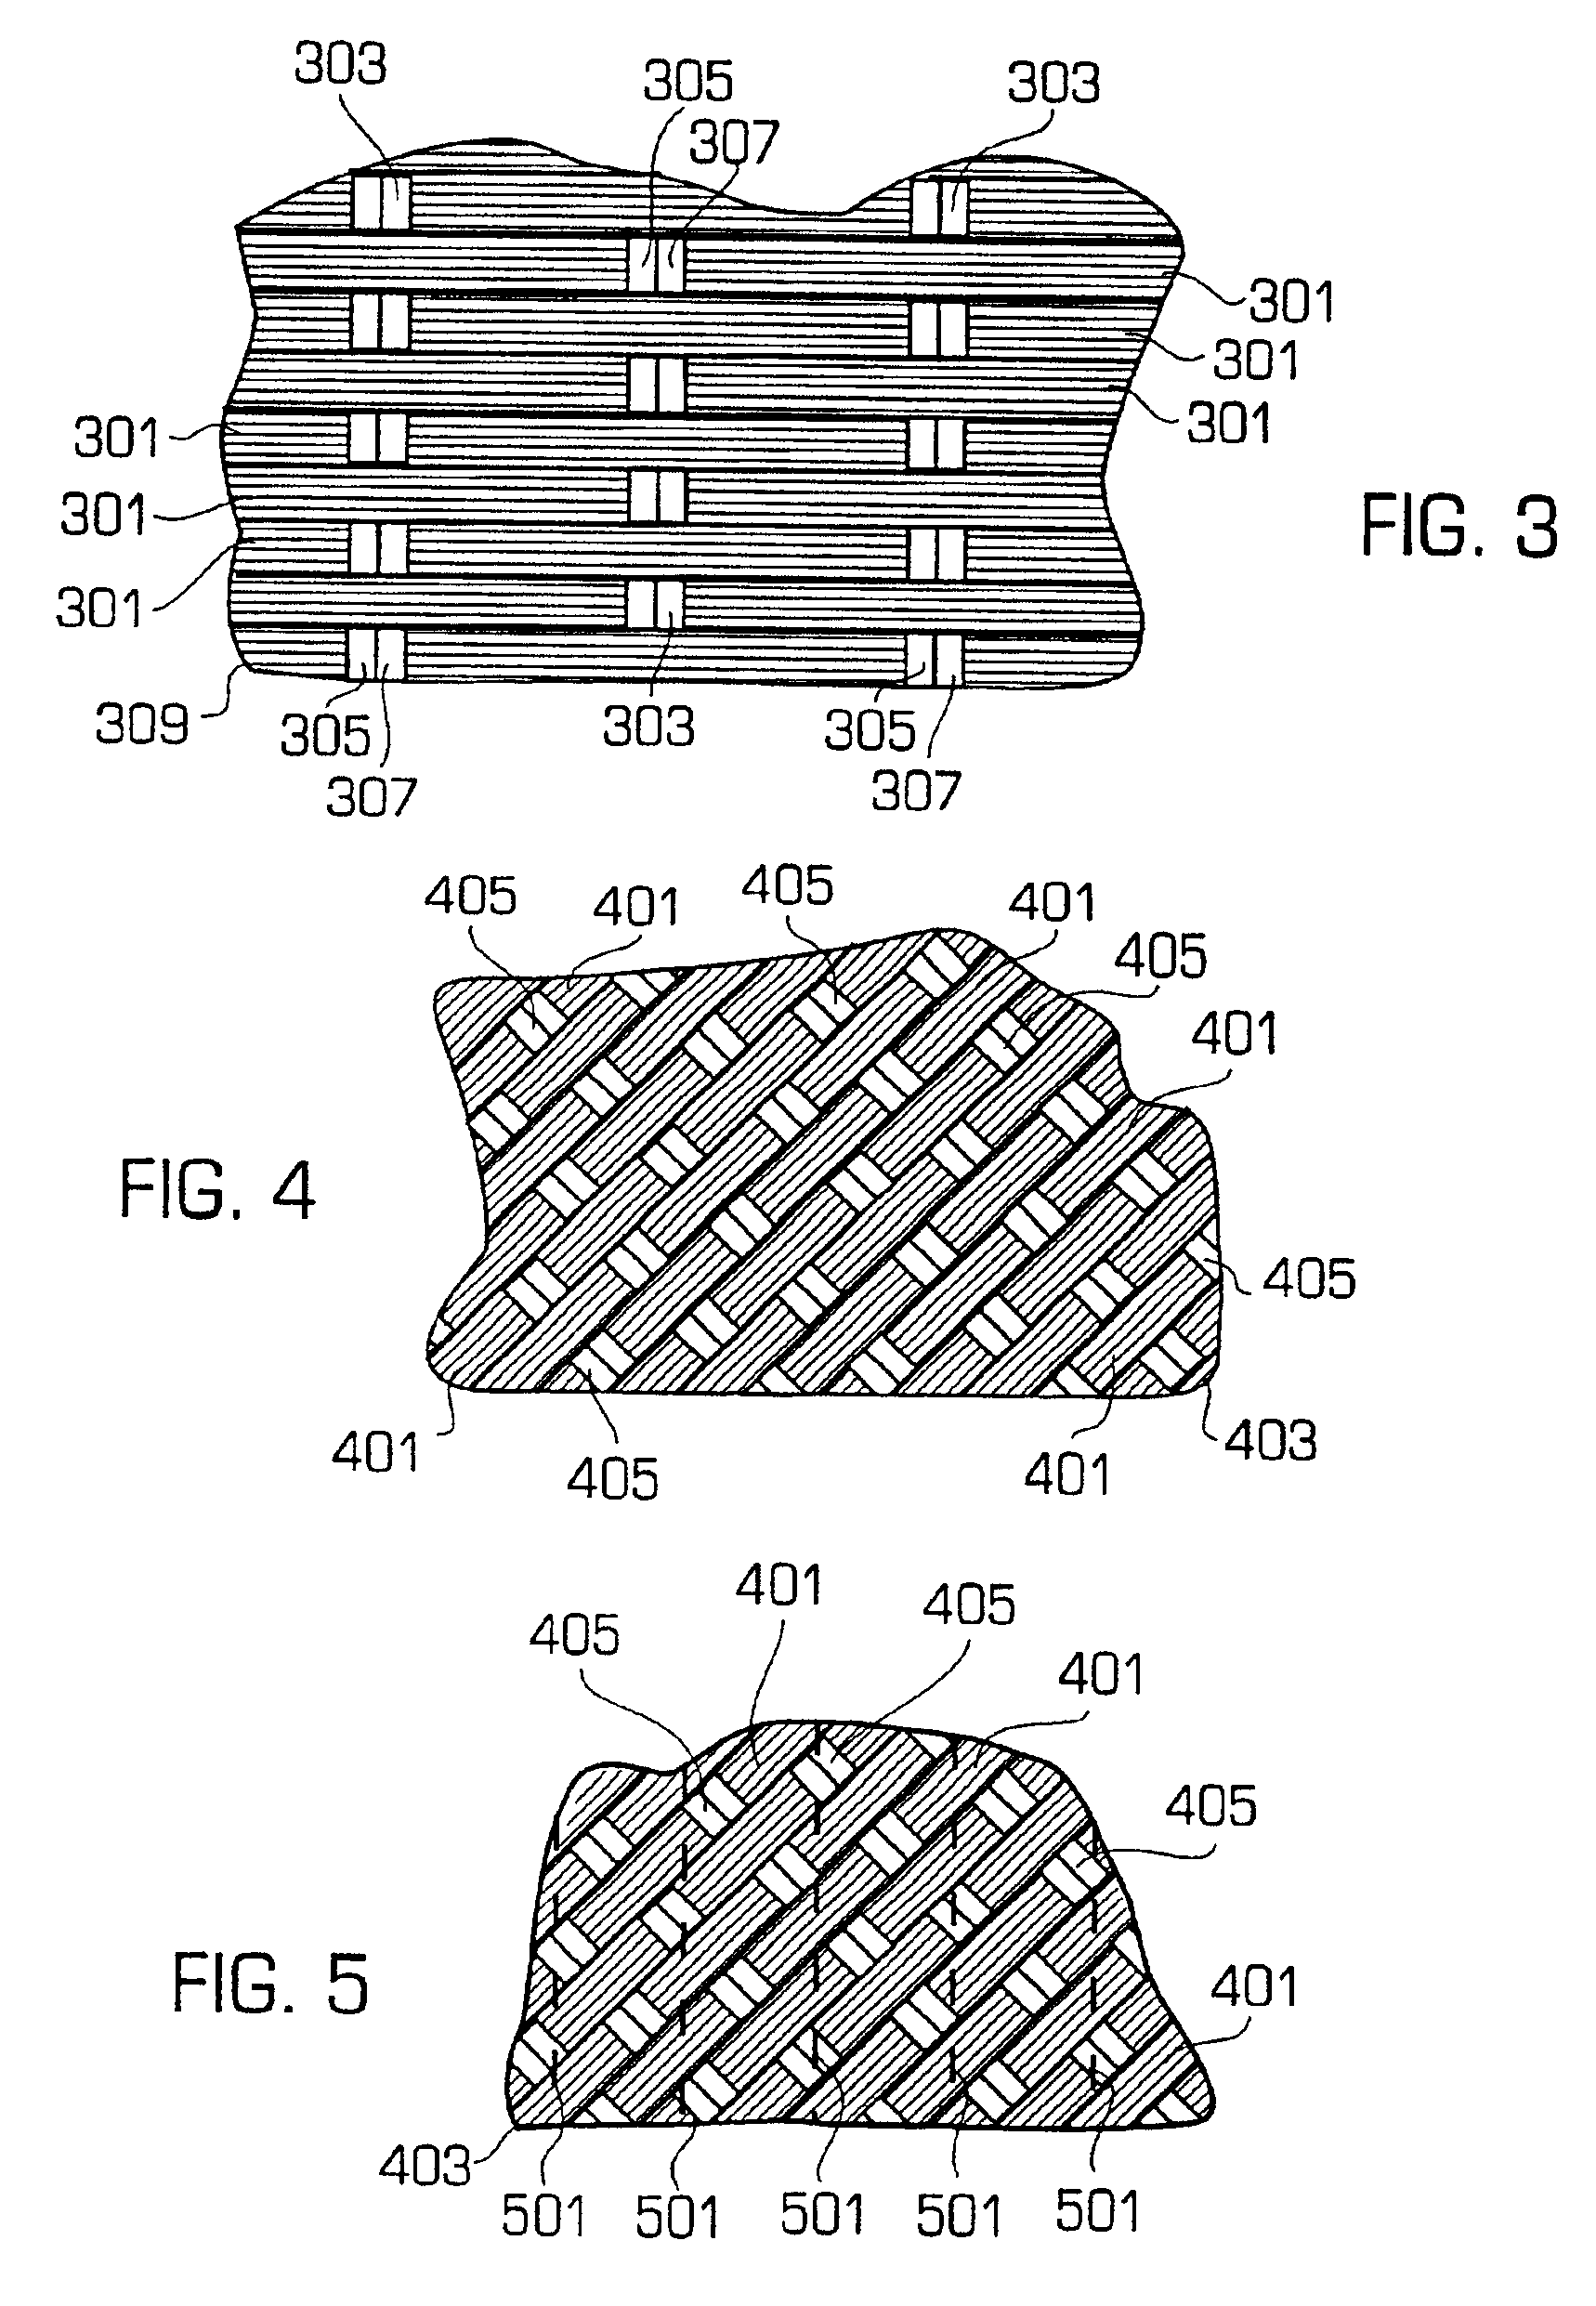 Method of manufacturing a stay-in-place form